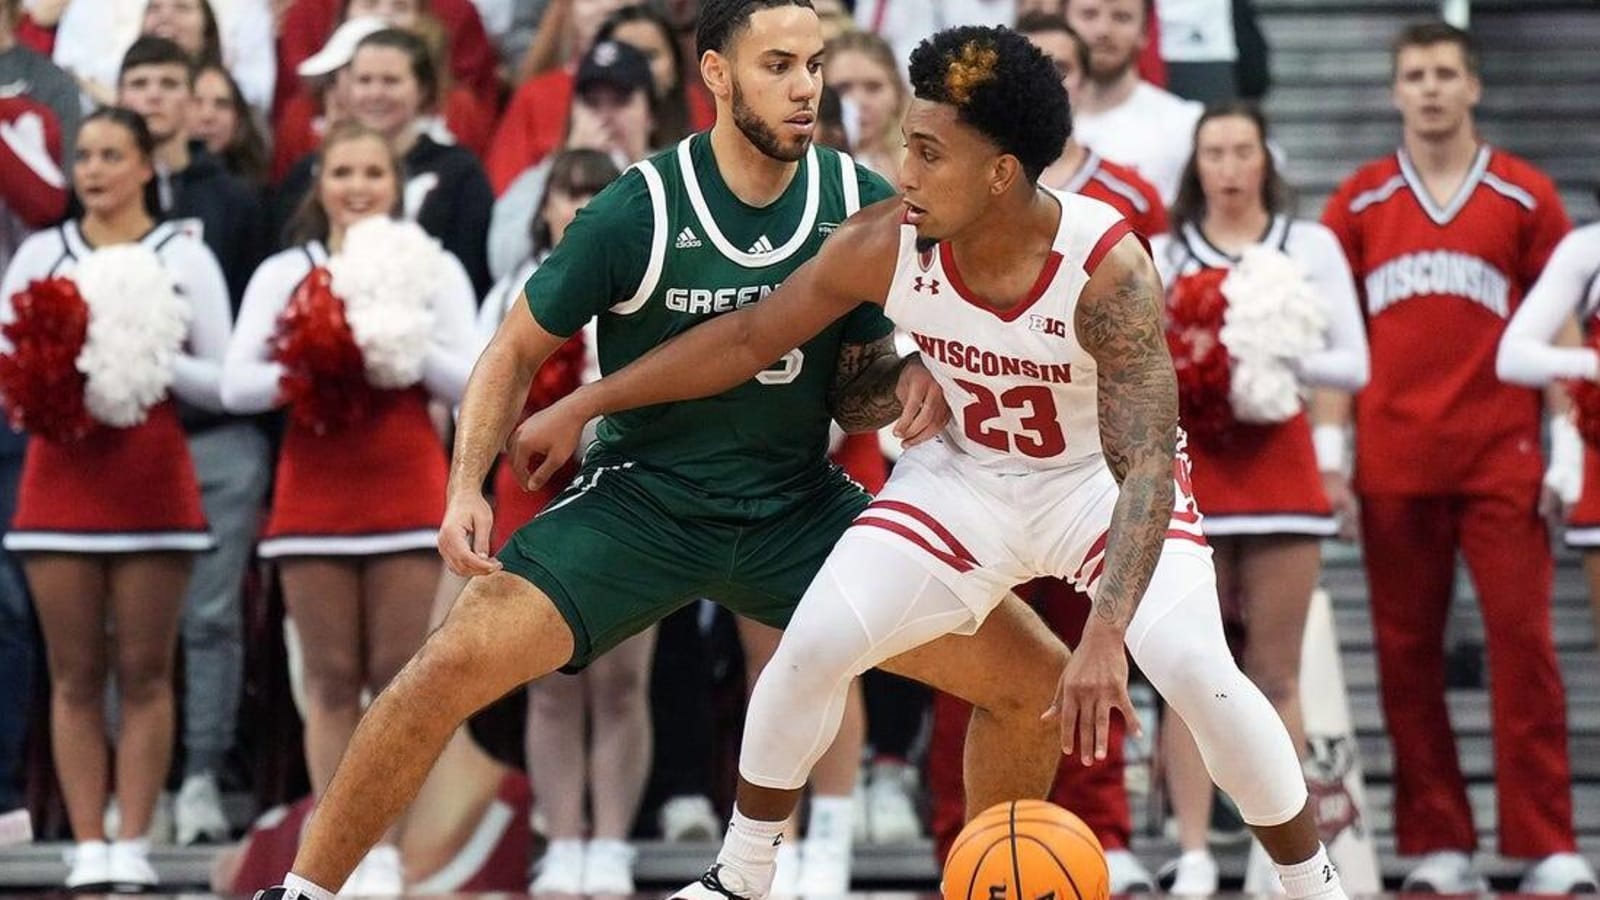 Wisconsin overcomes cold shooting to handle Green Bay